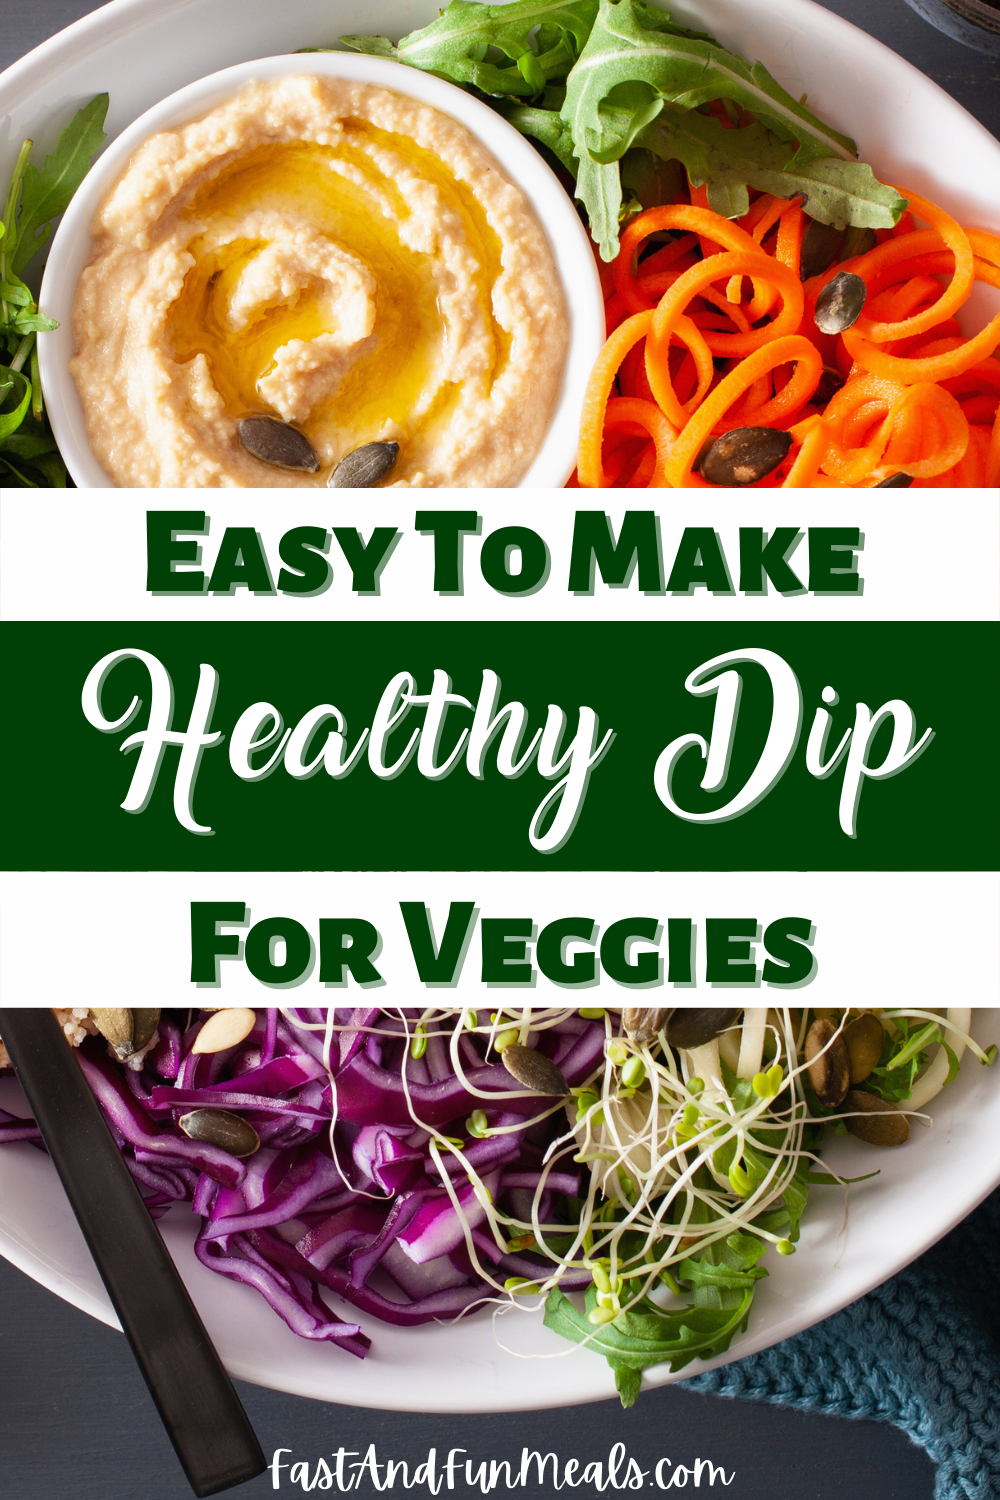 Pin showing the title Easy To Make Healthy Dip for Veggies